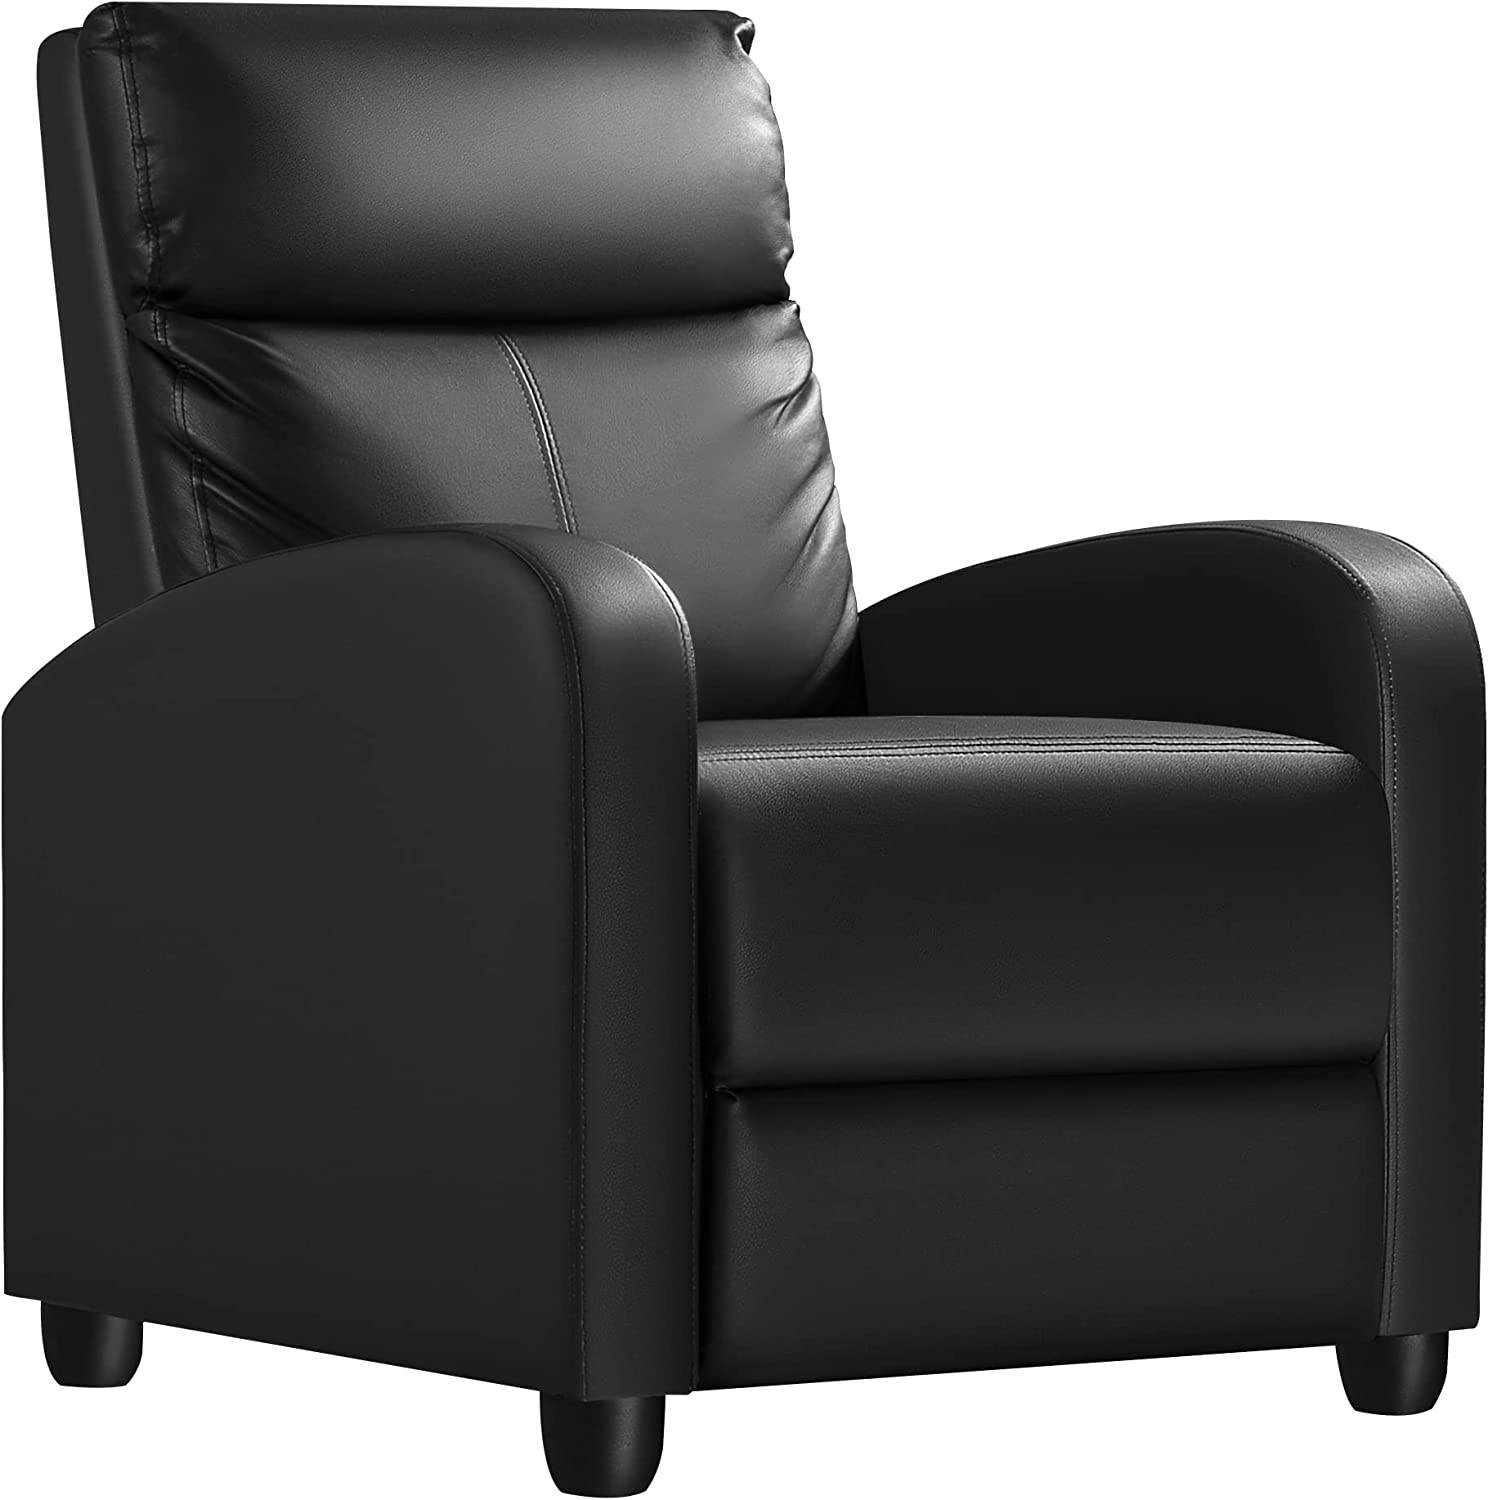 Homall Recliner Chair Padded Seat Pu Leather for [...]